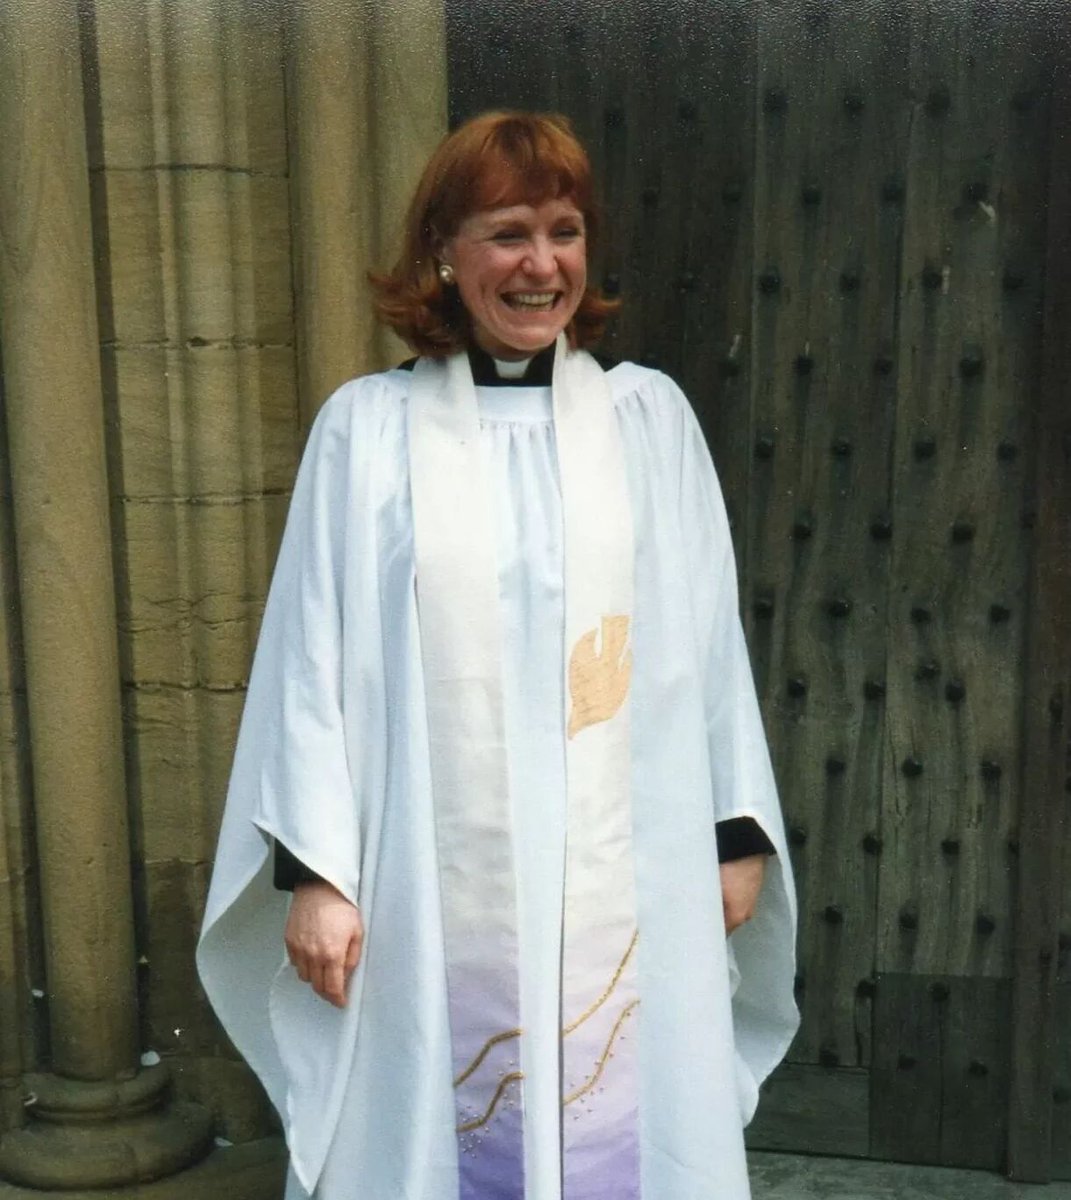 Today we celebrate the 30th anniversary of women's ordination to the priesthood. Read Dean @CatherineOgle 's reflections here: bit.ly/4a4mDL4 Listen on Spotify: spoti.fi/3wPI6cm Pictured: Dean Catherine at her priesting service in 1994 @CofEWinchester